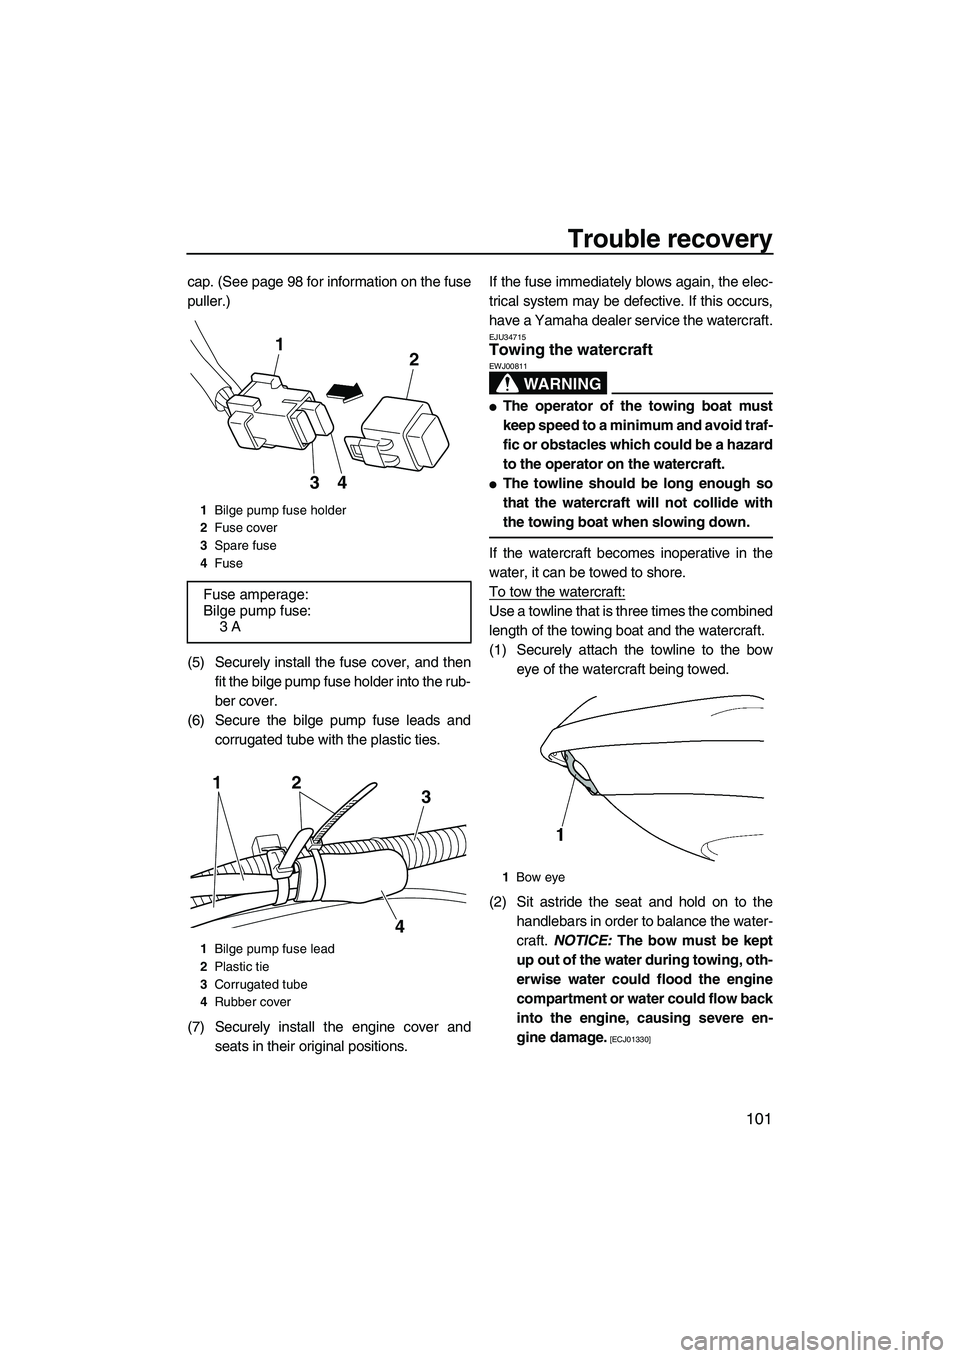 YAMAHA FX SHO 2011  Owners Manual Trouble recovery
101
cap. (See page 98 for information on the fuse
puller.)
(5) Securely install the fuse cover, and then
fit the bilge pump fuse holder into the rub-
ber cover.
(6) Secure the bilge p